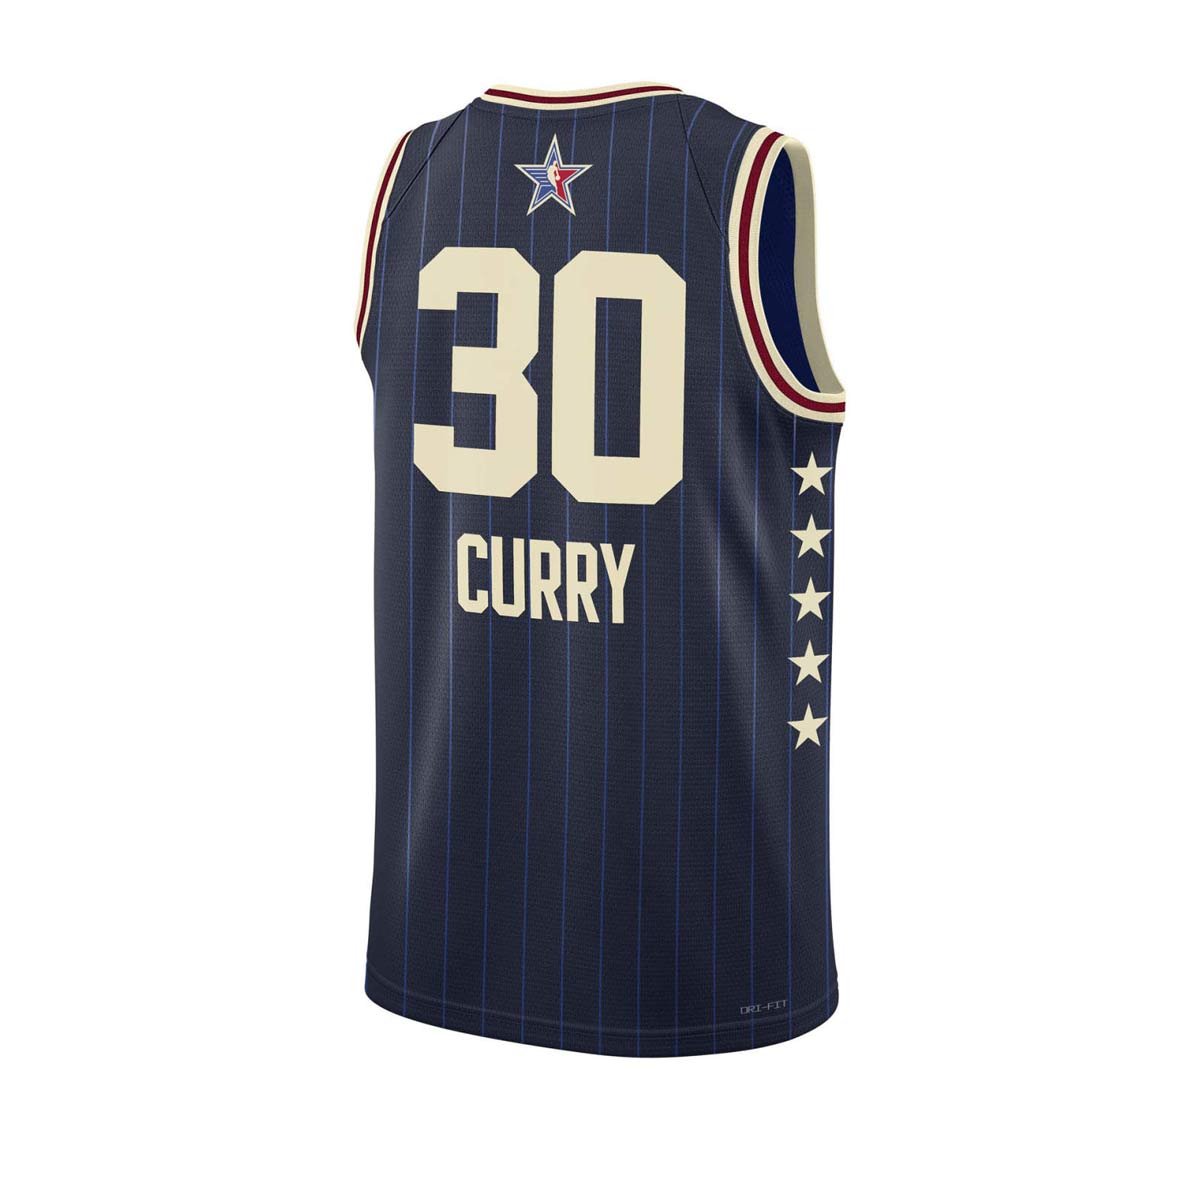 Asw Mwmn Jersey T2 '24 - Curry